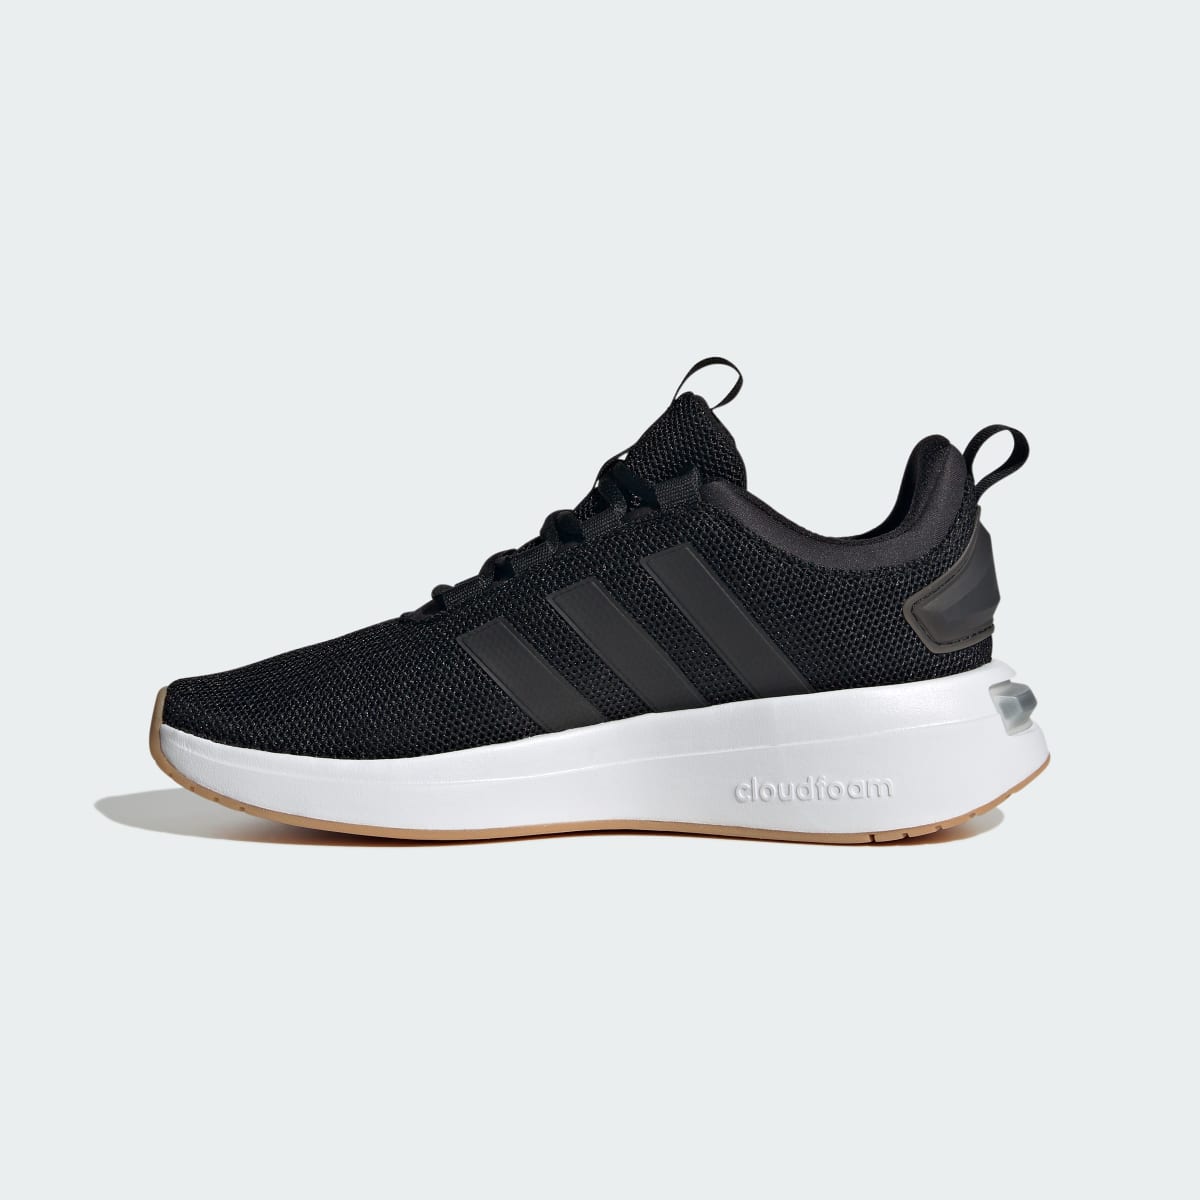 Adidas Racer TR23 Shoes. 7